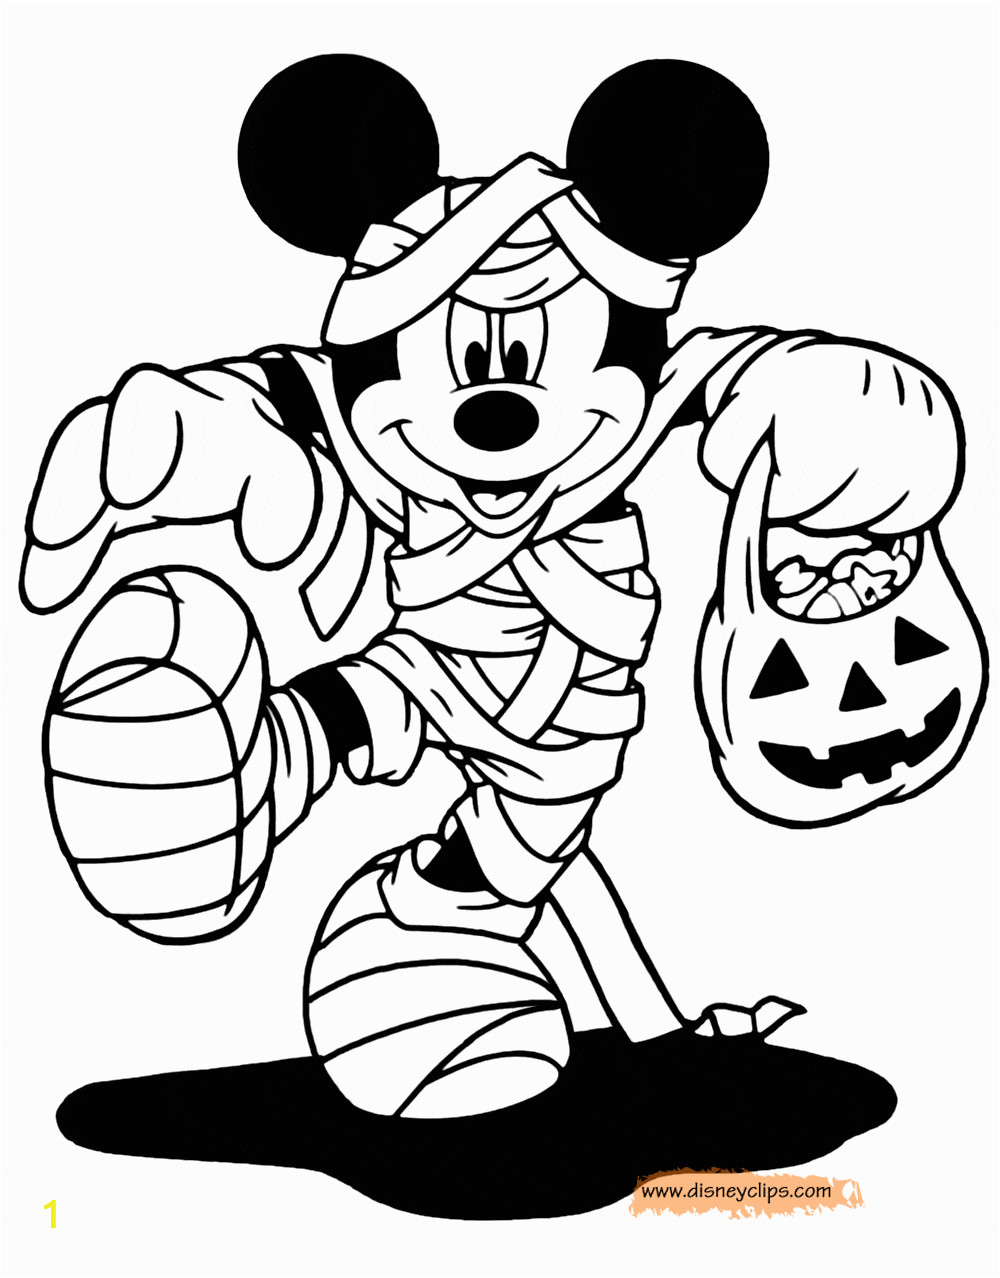 halloween mickey mouse coloring pages